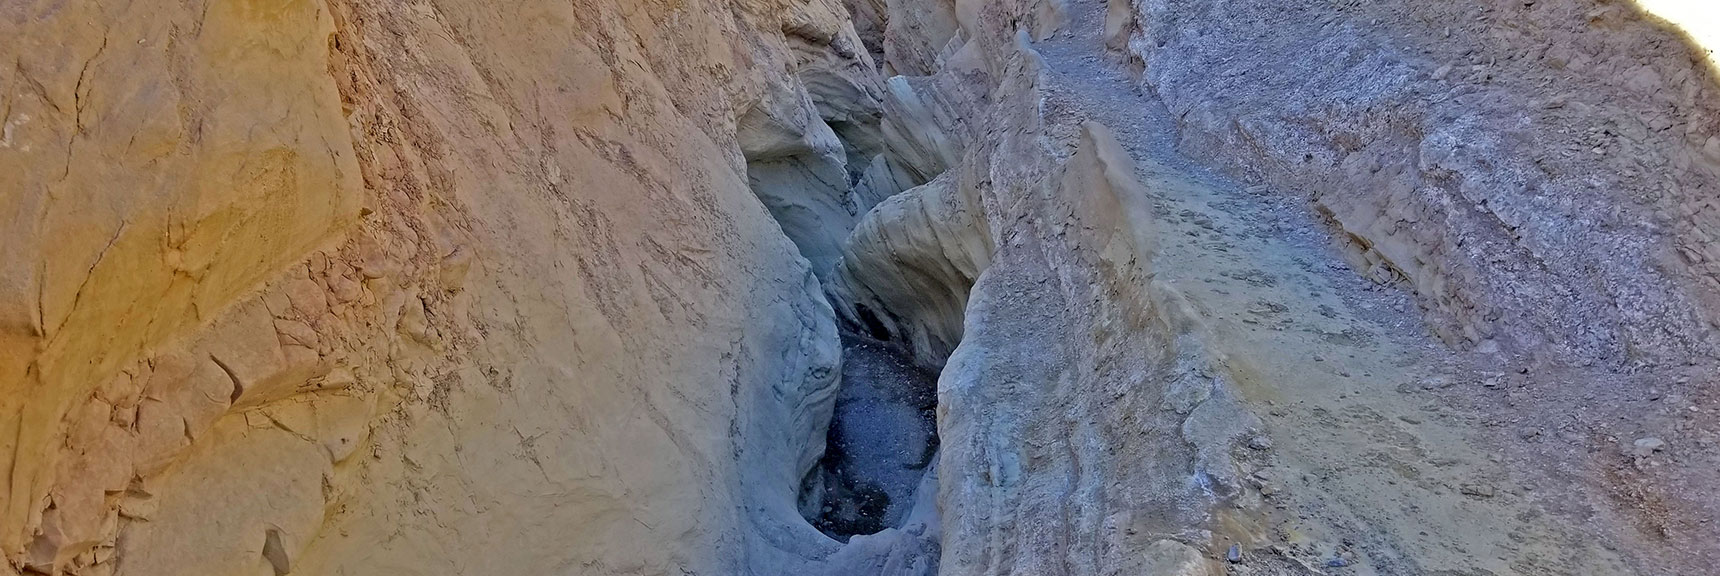 Top Entrance to Narrow Canyon, Gower Gulch Origin | Golden Canyon to Zabriskie Point | Death Valley National Park, California